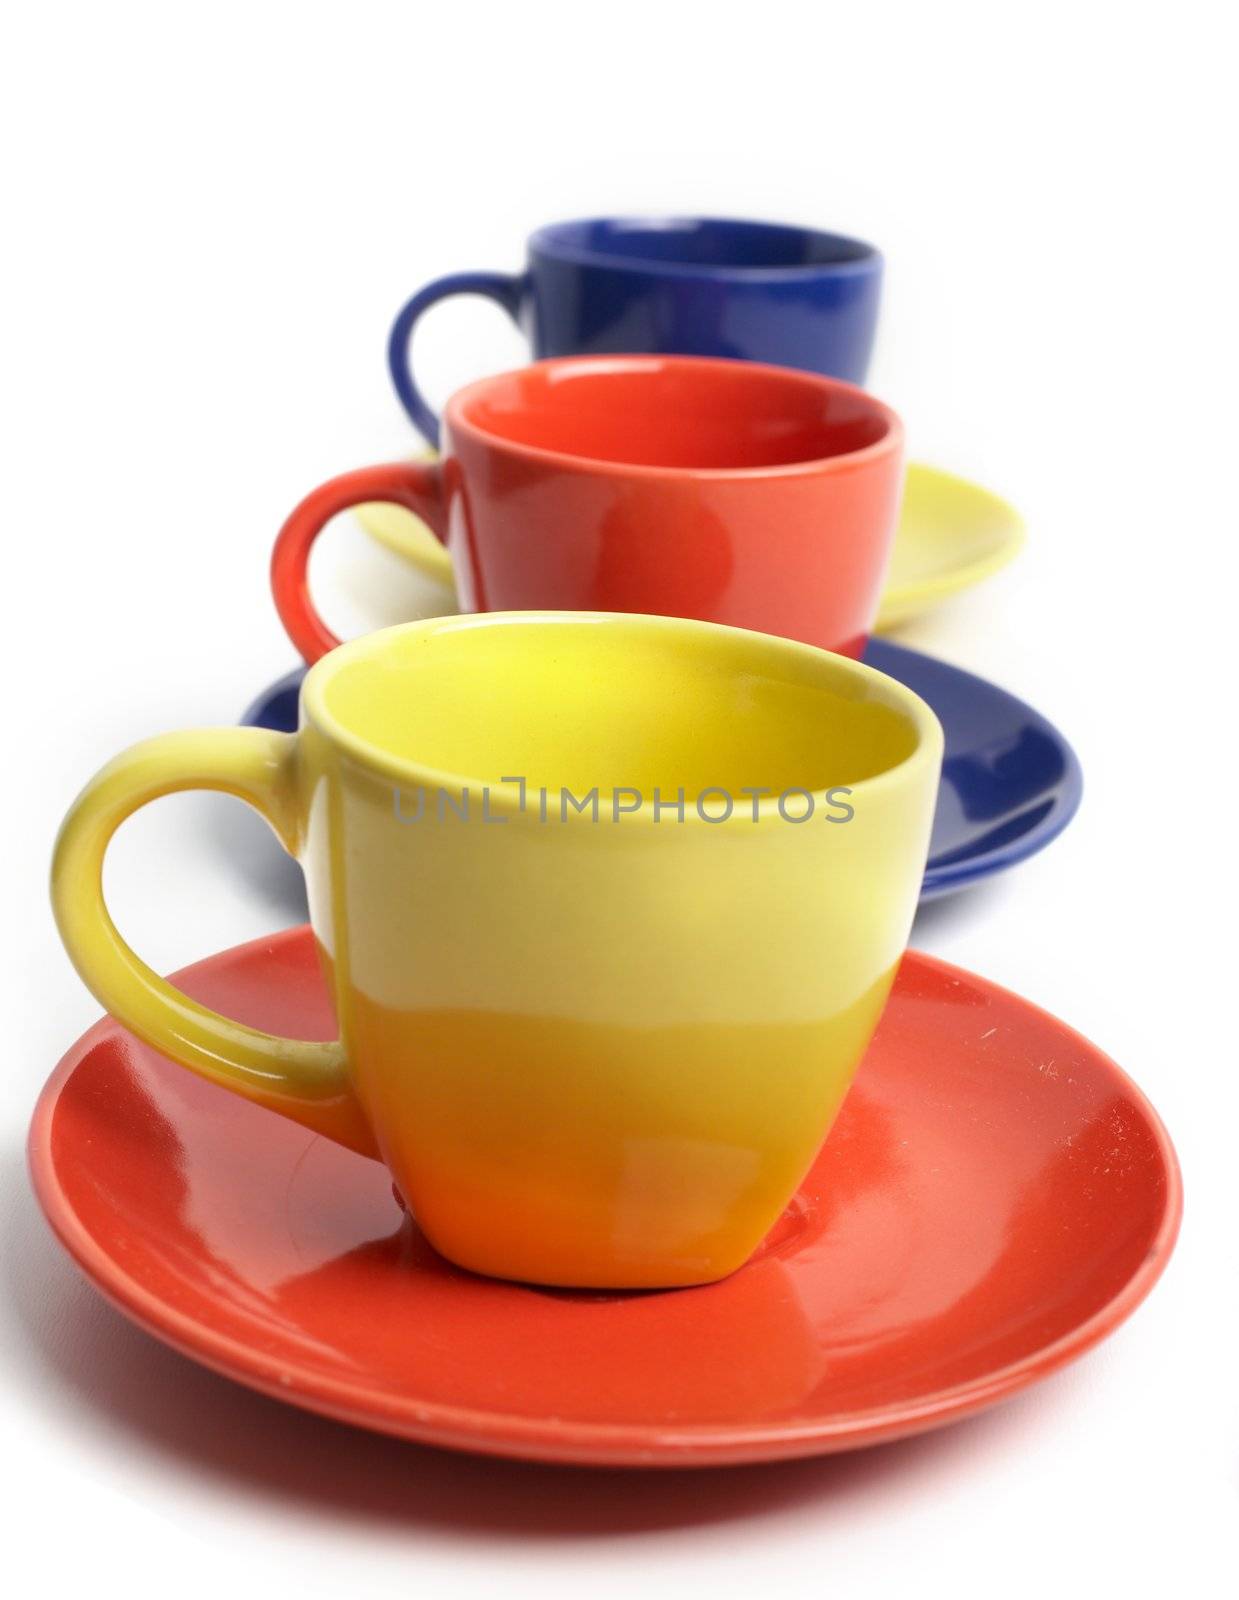 An image of color cups and saucers